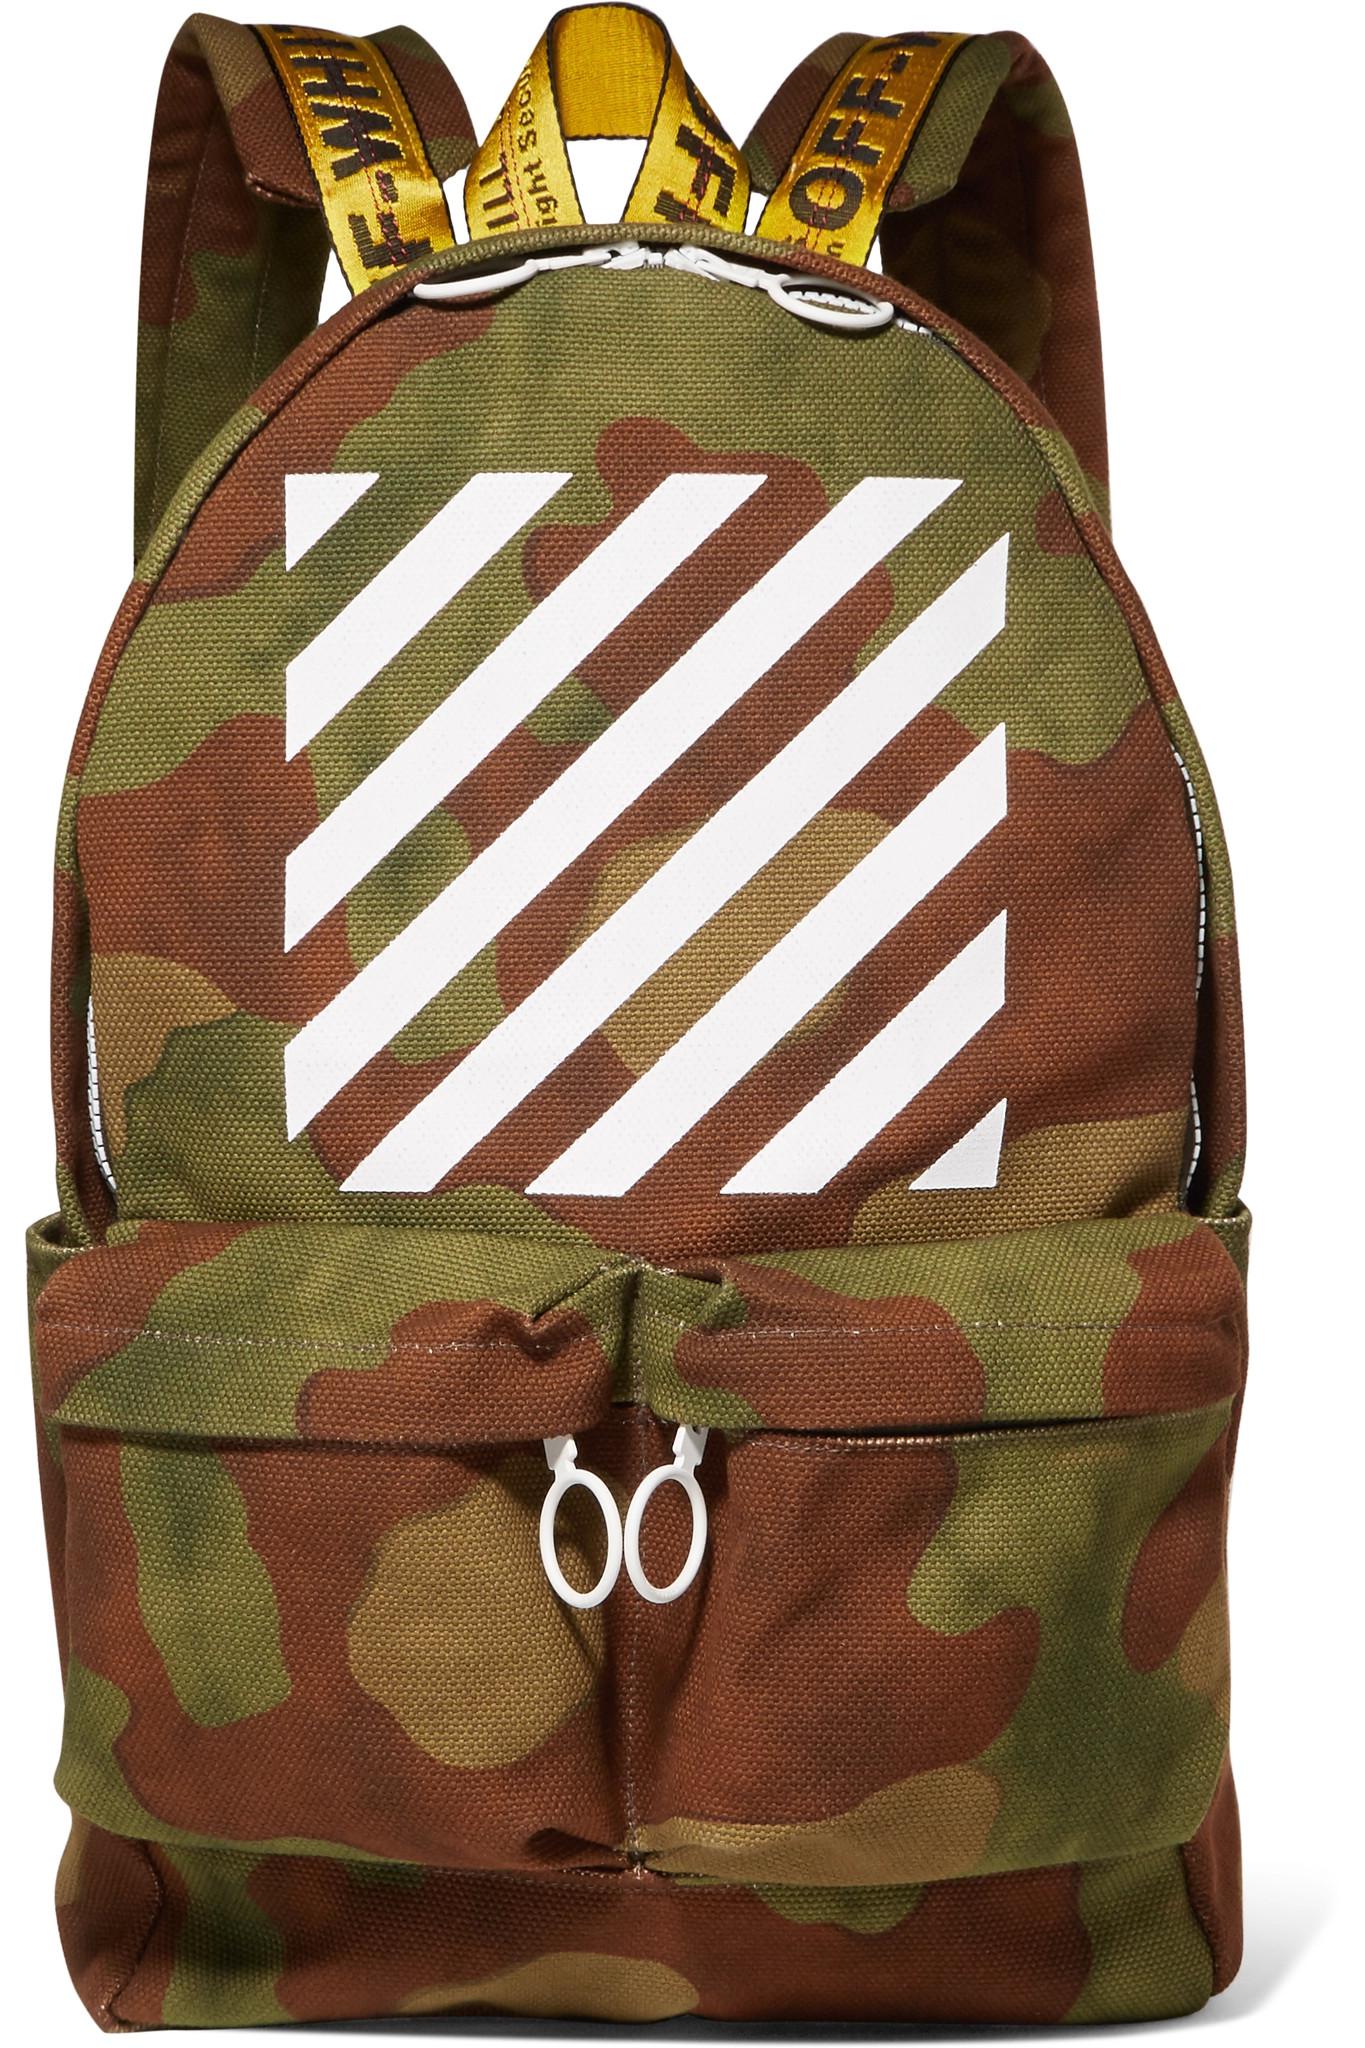 Off-White c/o Virgil Abloh Printed Canvas Backpack in Army Green (Green) -  Lyst